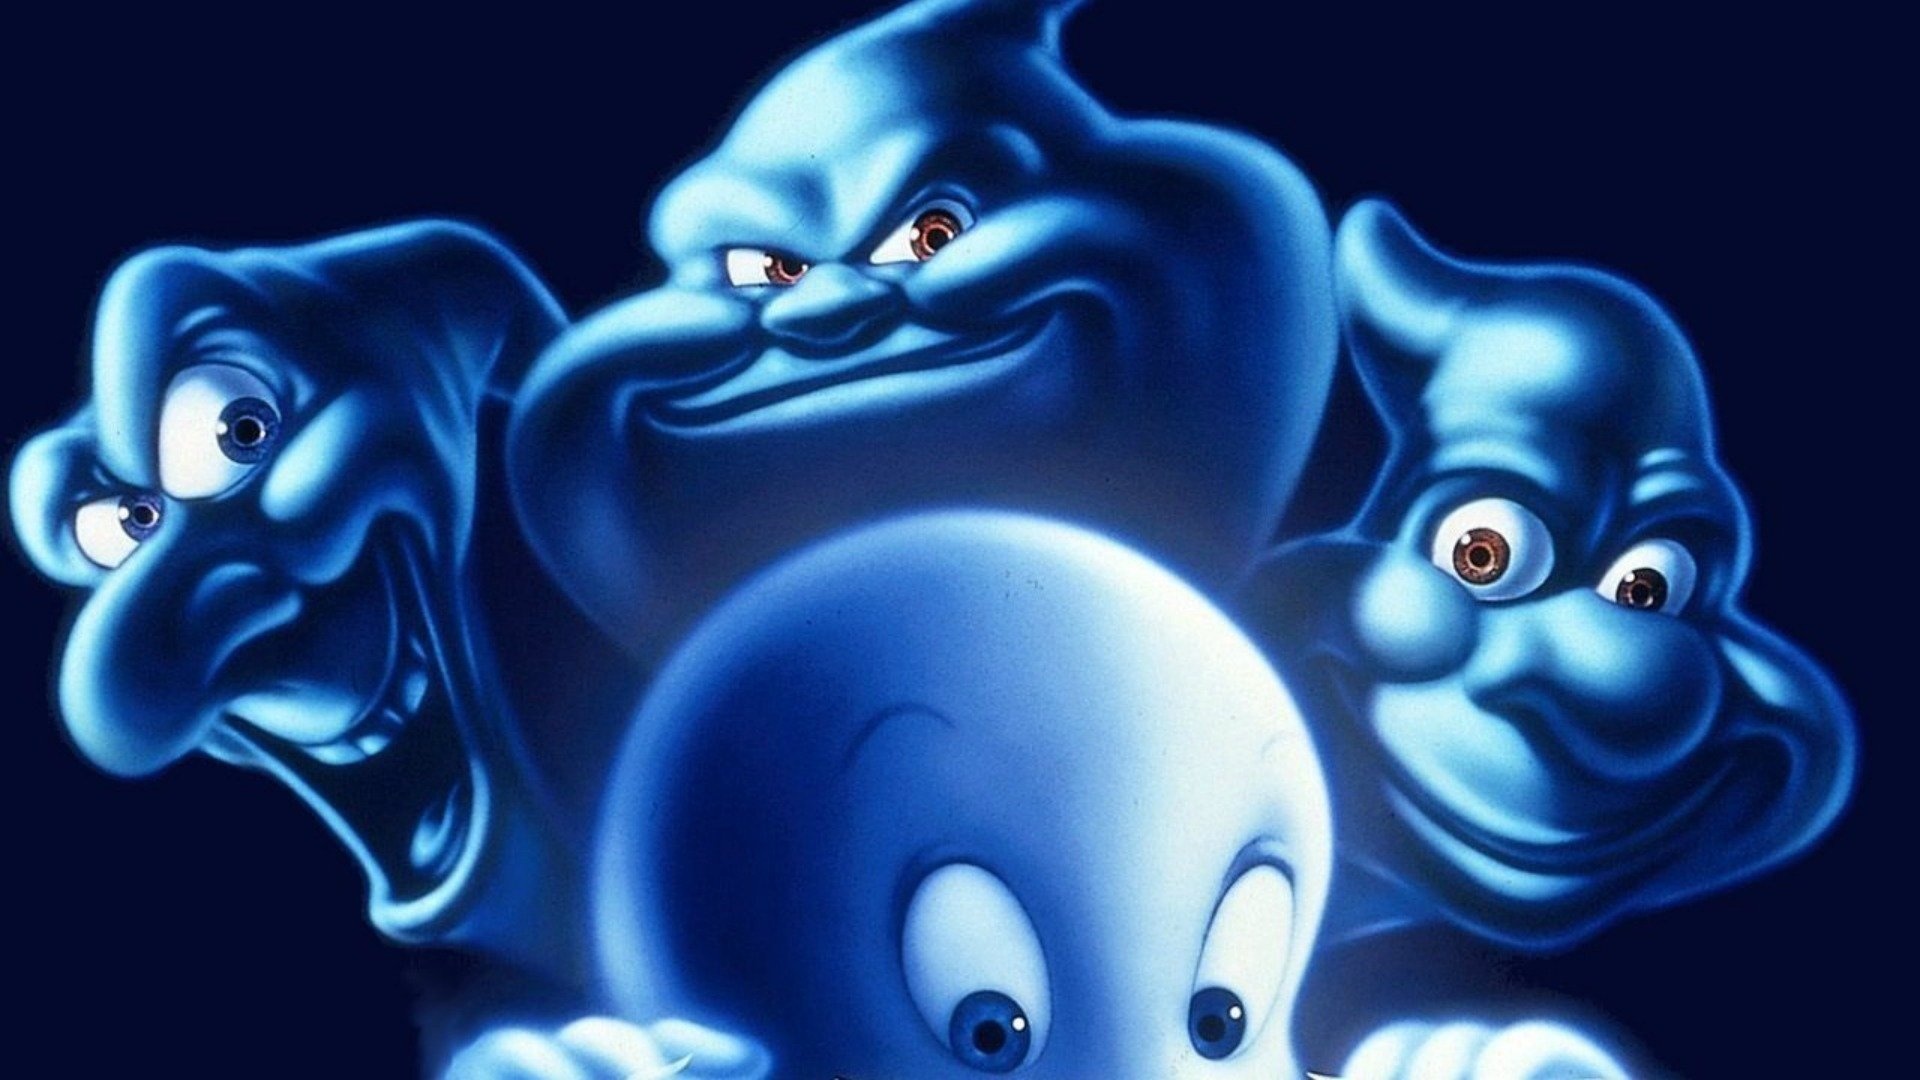 Casper (Movie): A 1995 adaptation of the well-known cartoon series chronicling the adventures of the titular friendly ghost. 1920x1080 Full HD Wallpaper.